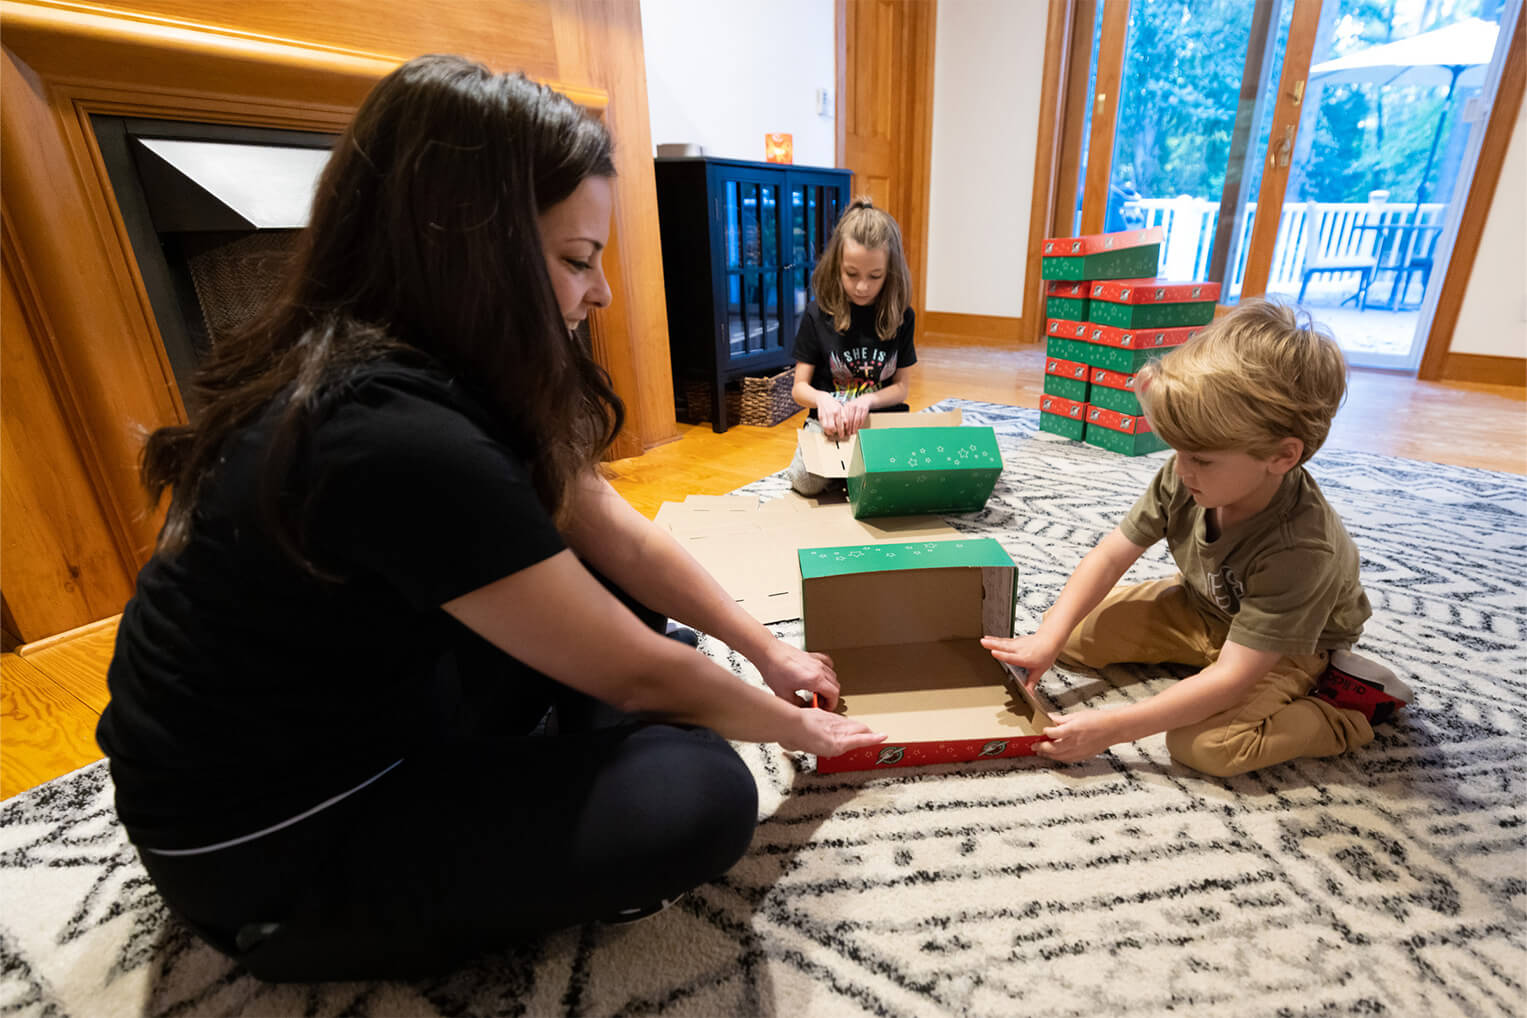 Ava's mother, Danielle, and brother, Jack, pack the shoebox gifts together.